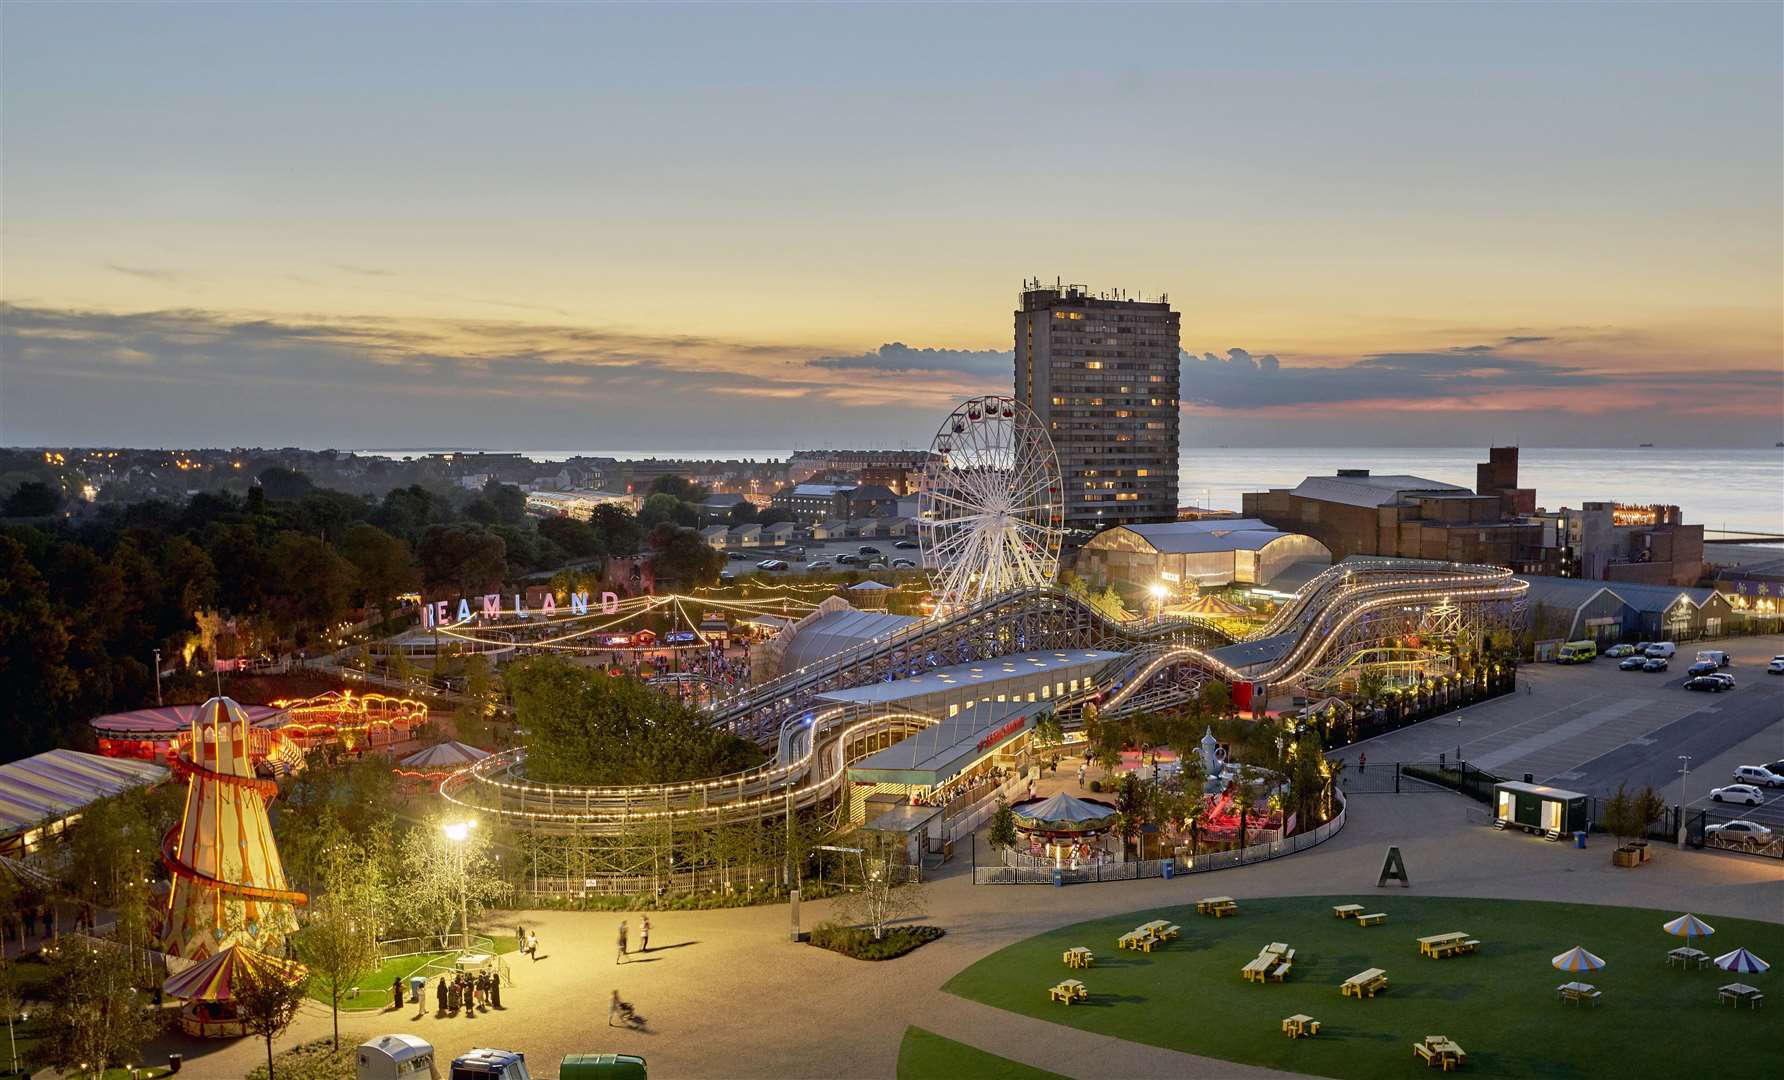 Dreamland has opened with free entry